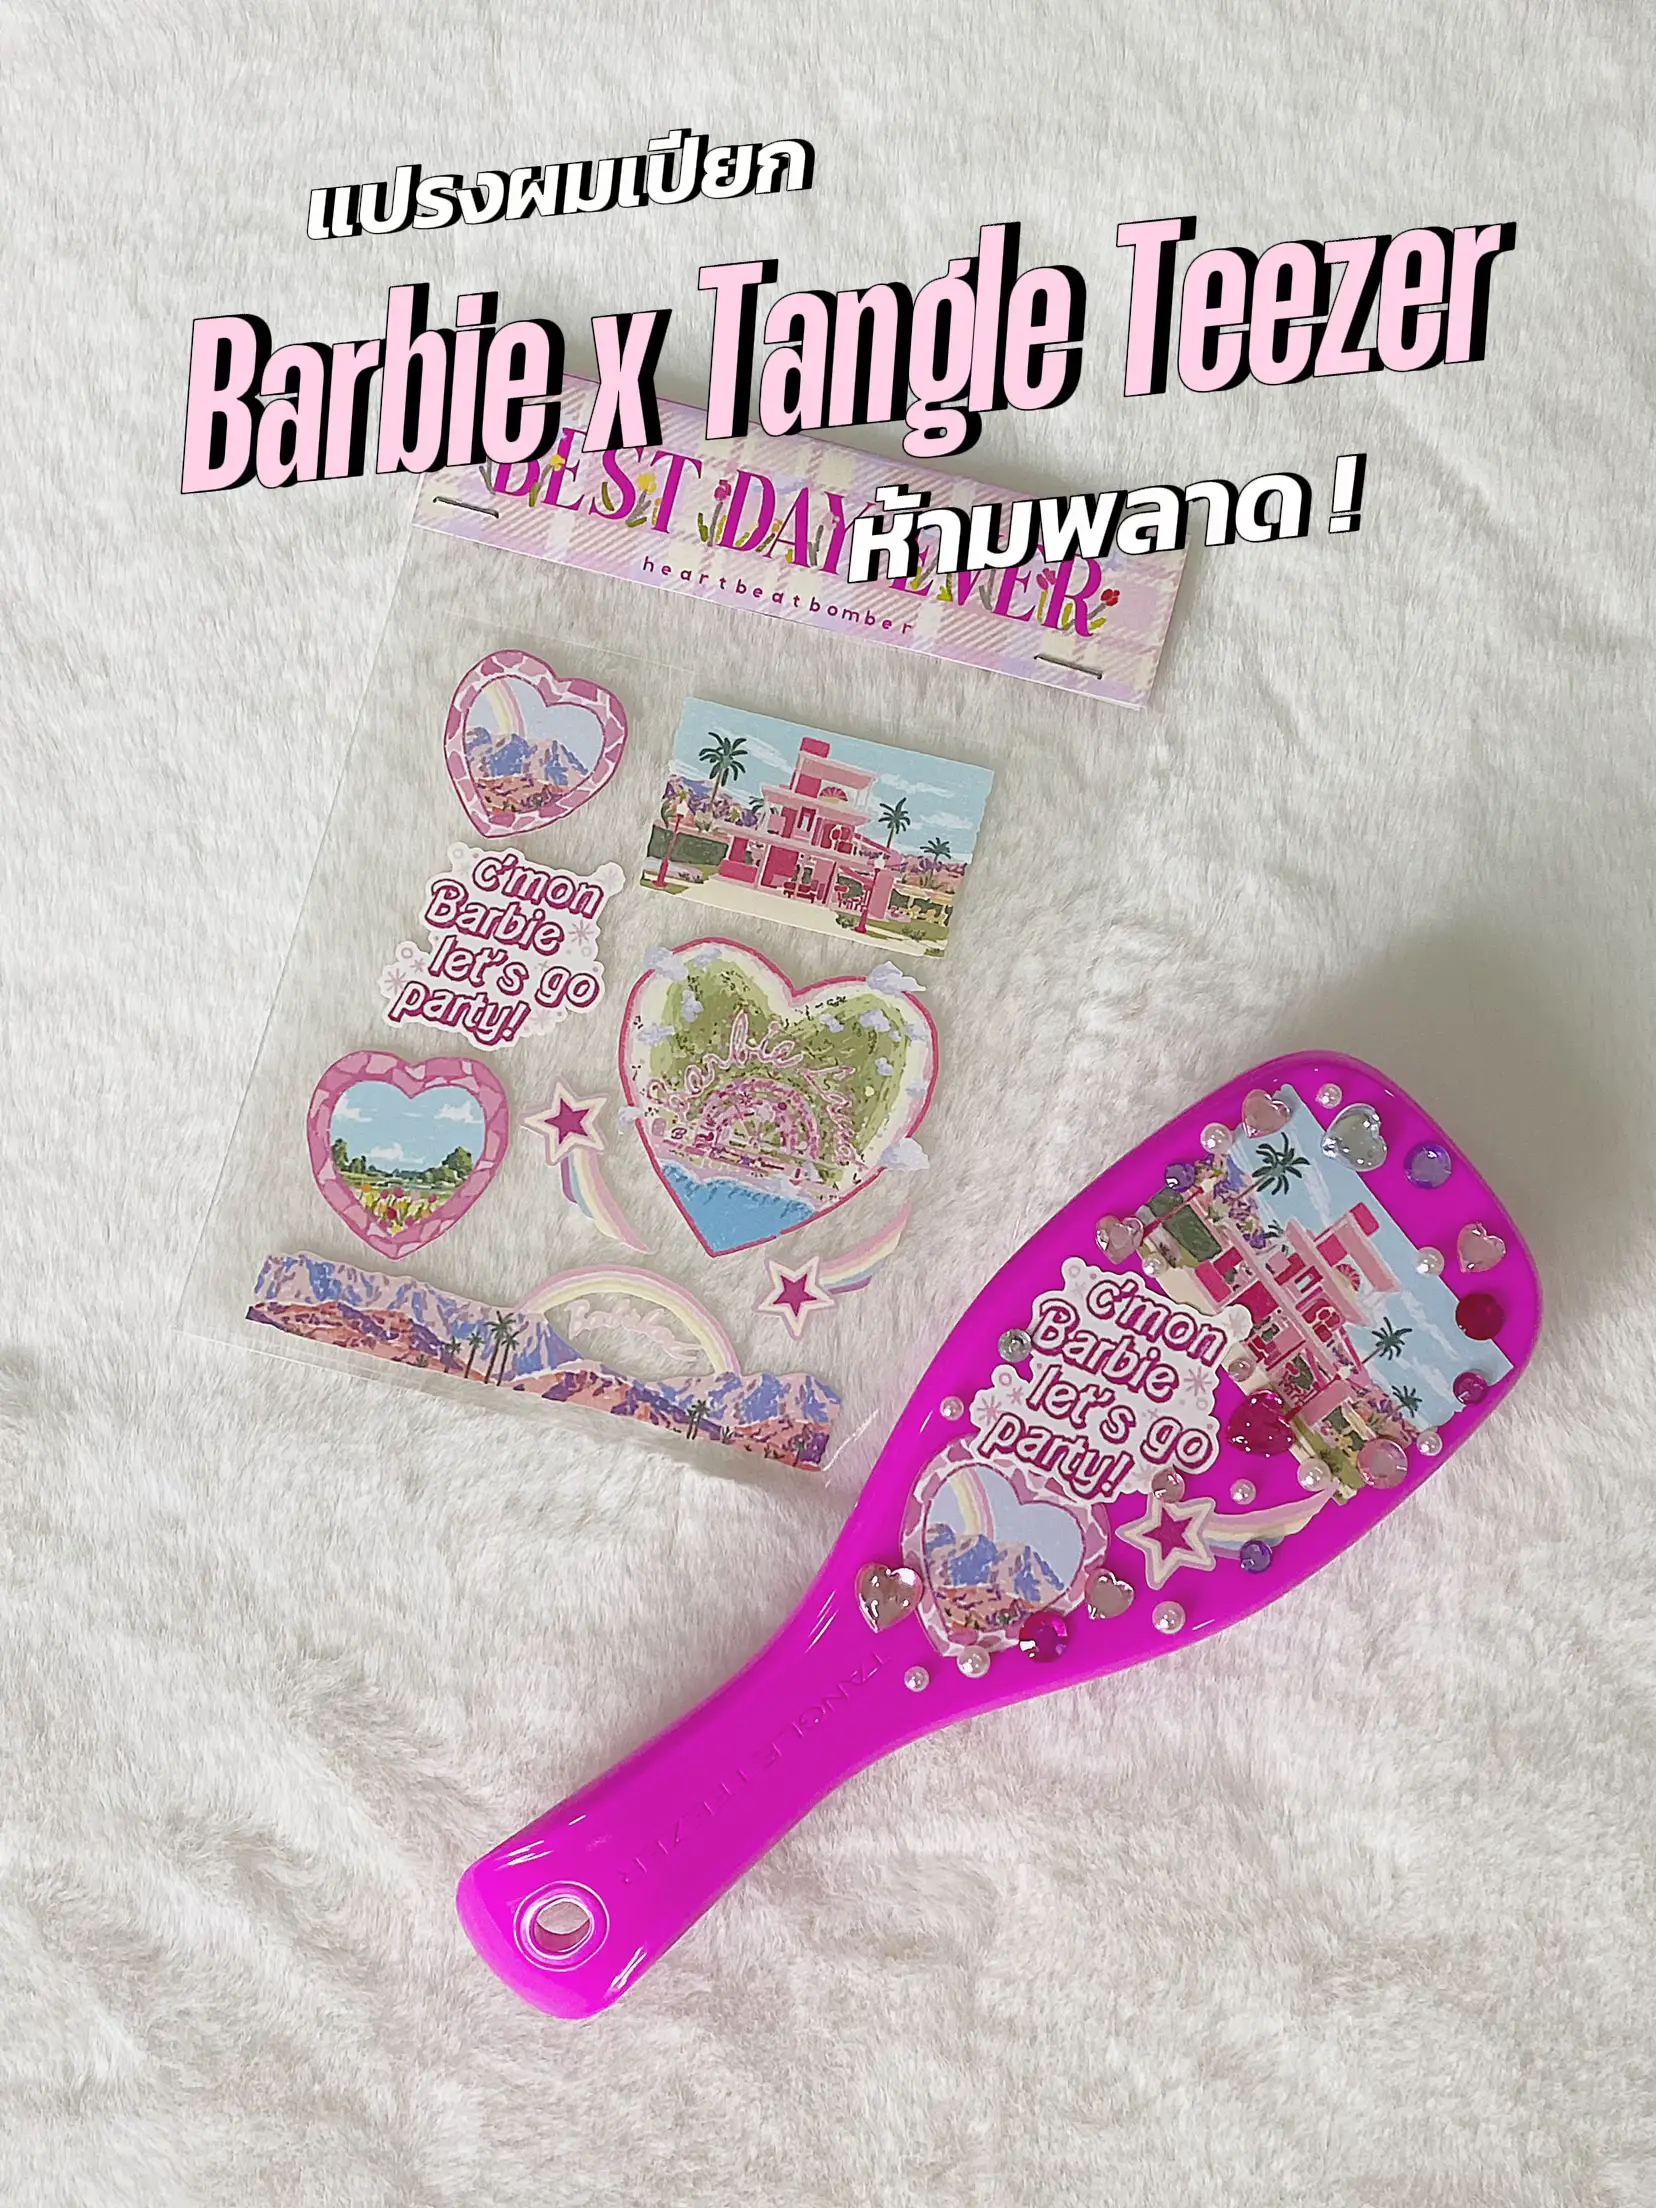 Barbie's hair brush. It's just beautiful to carry.💗🩰✨🫧, Gallery posted  by georgiehae ♡